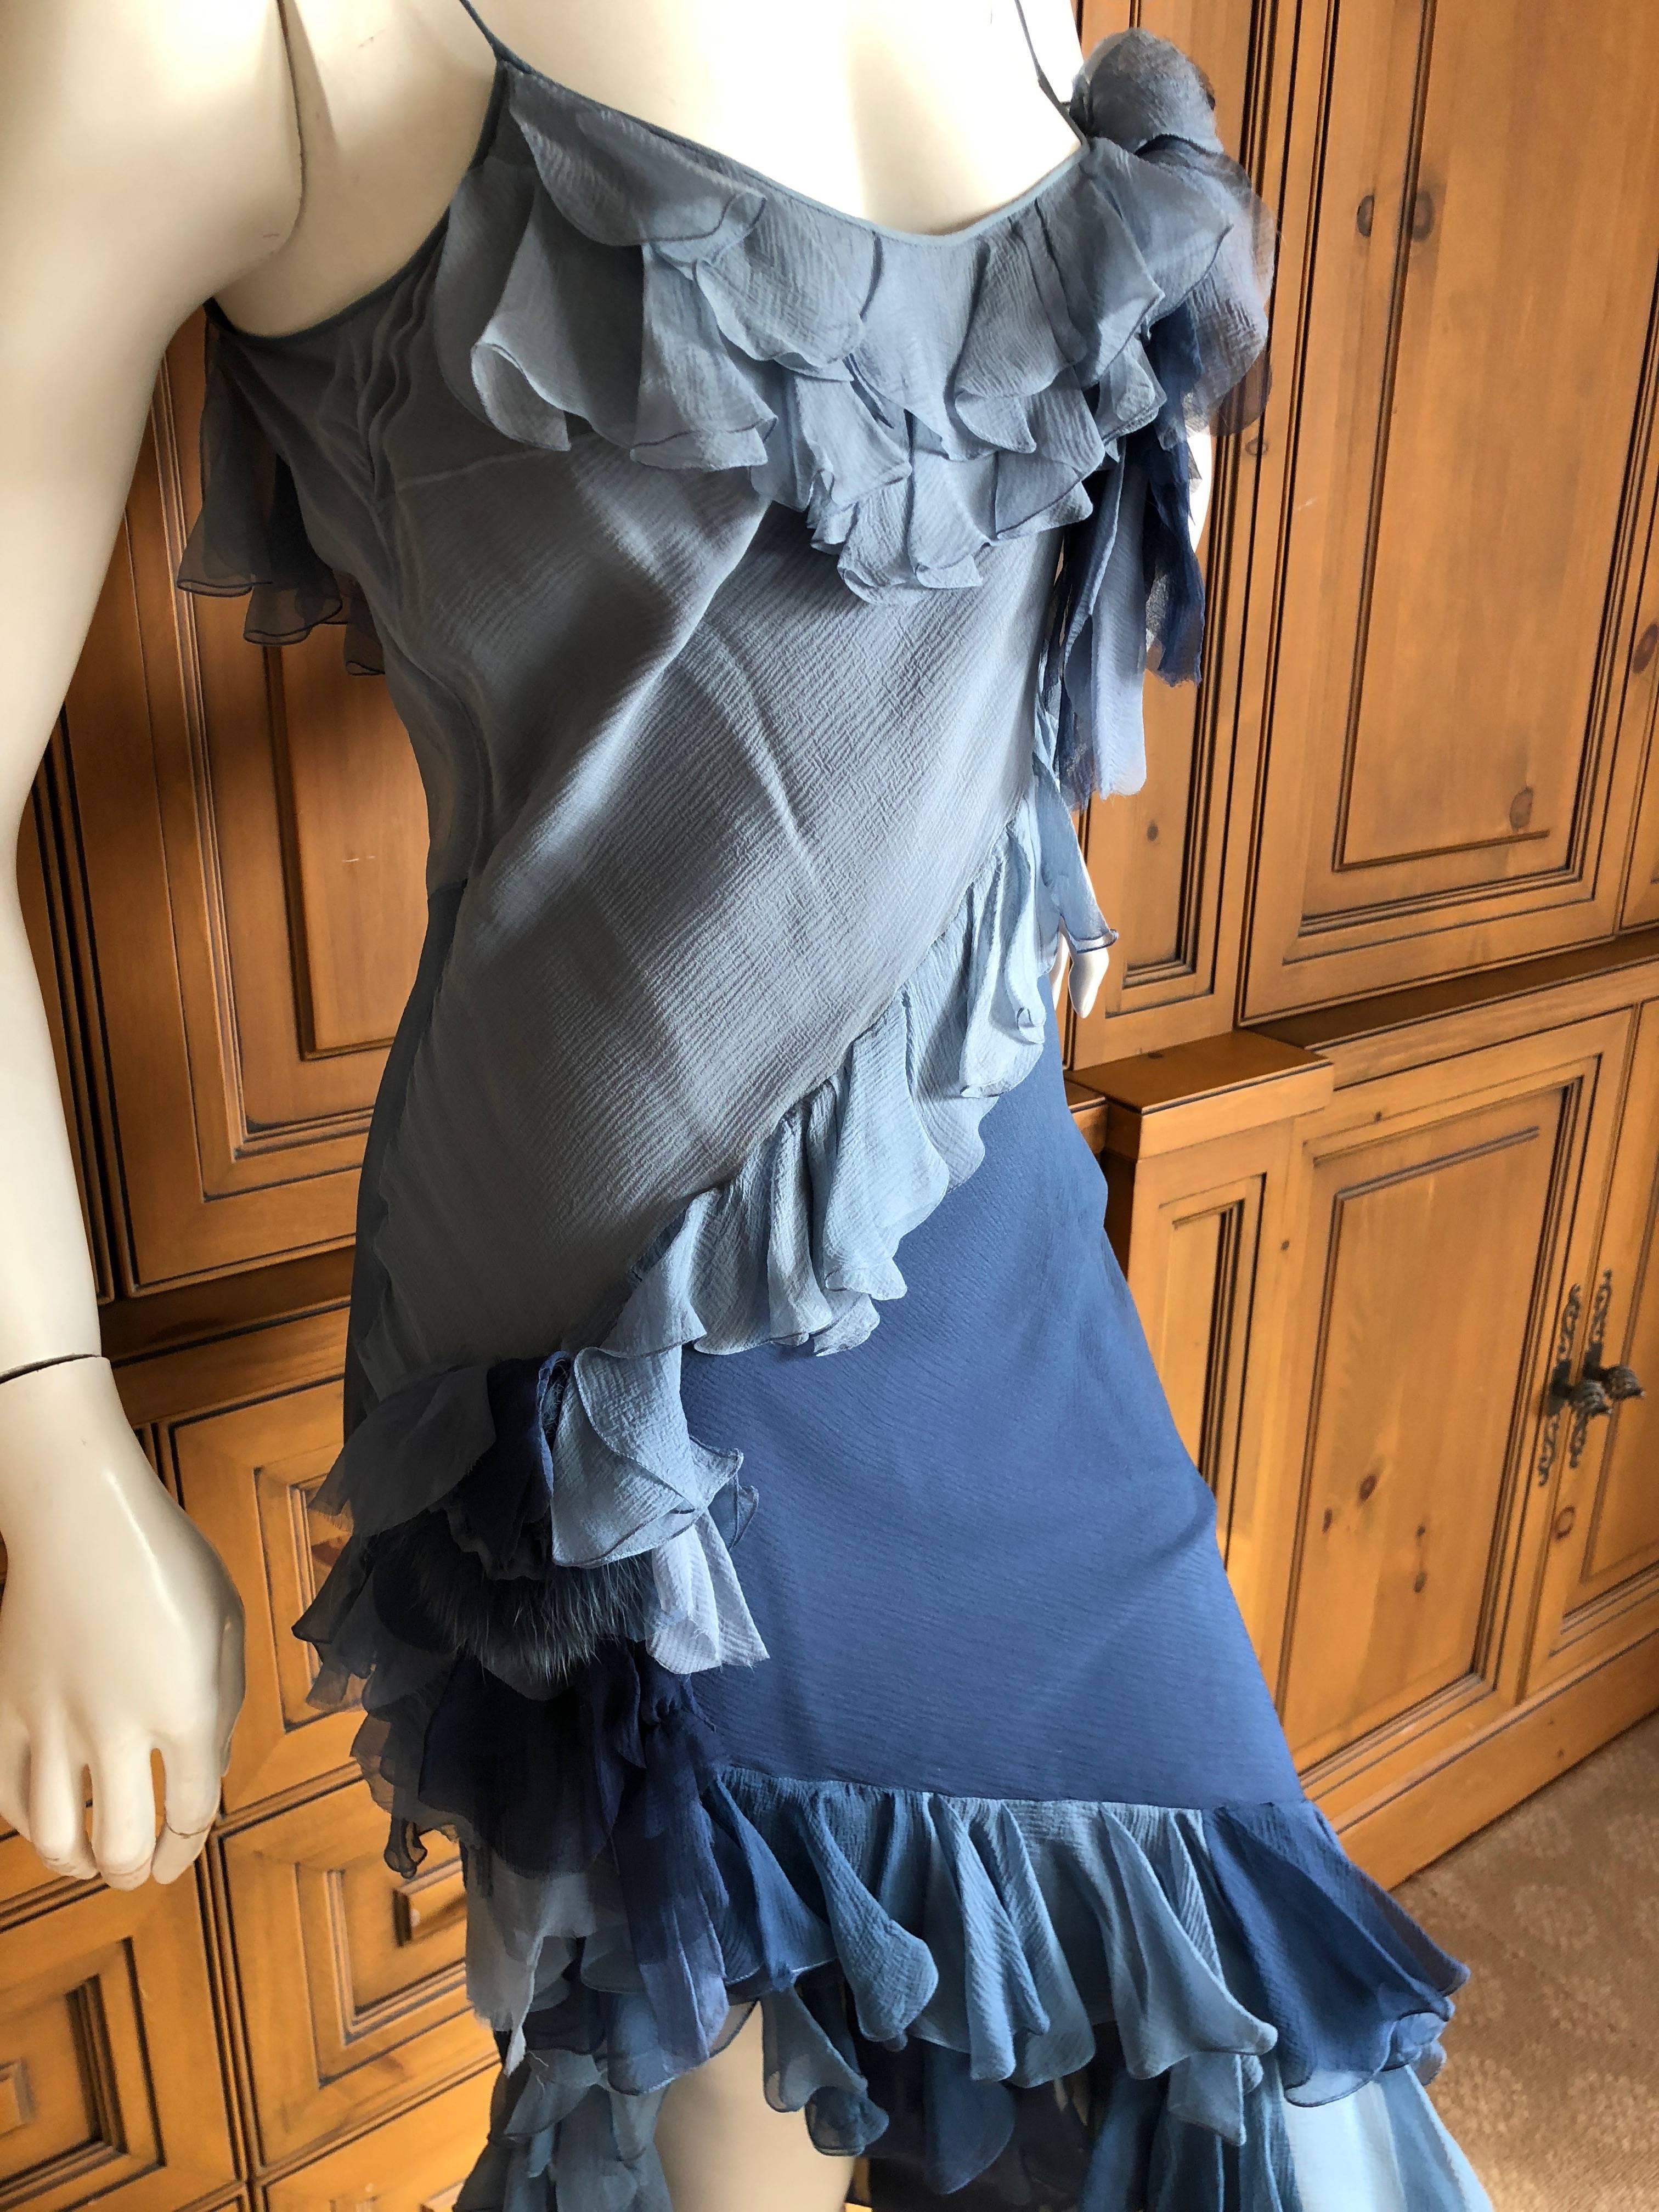 Women's John Galliano 1990's Label Silk Ruffle Ombre Dress with Fur Trim Floral Accents For Sale